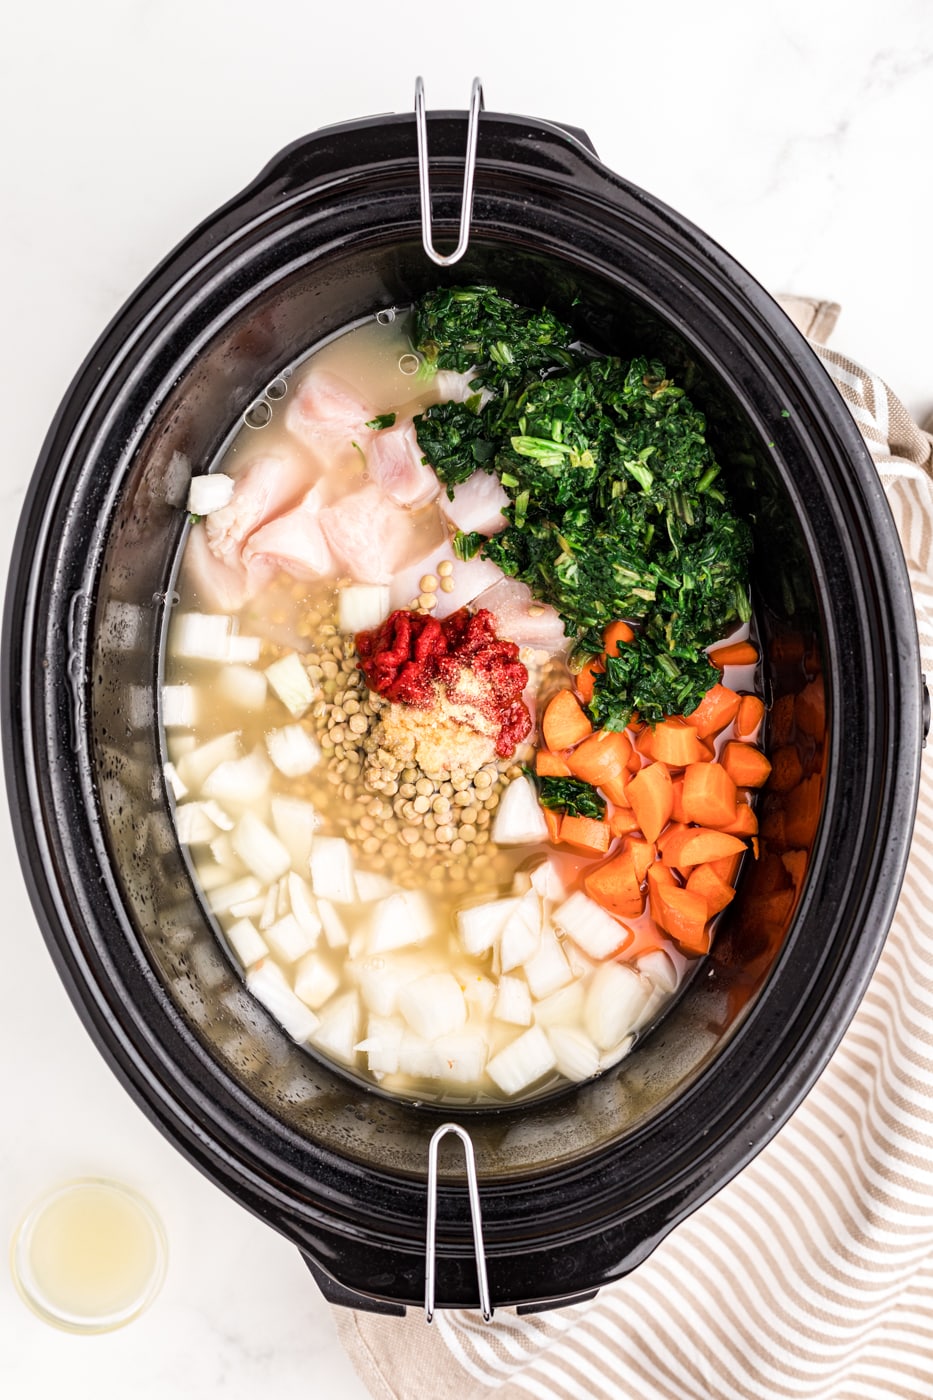 a slow cooker full of chicken, lentils, and veggies